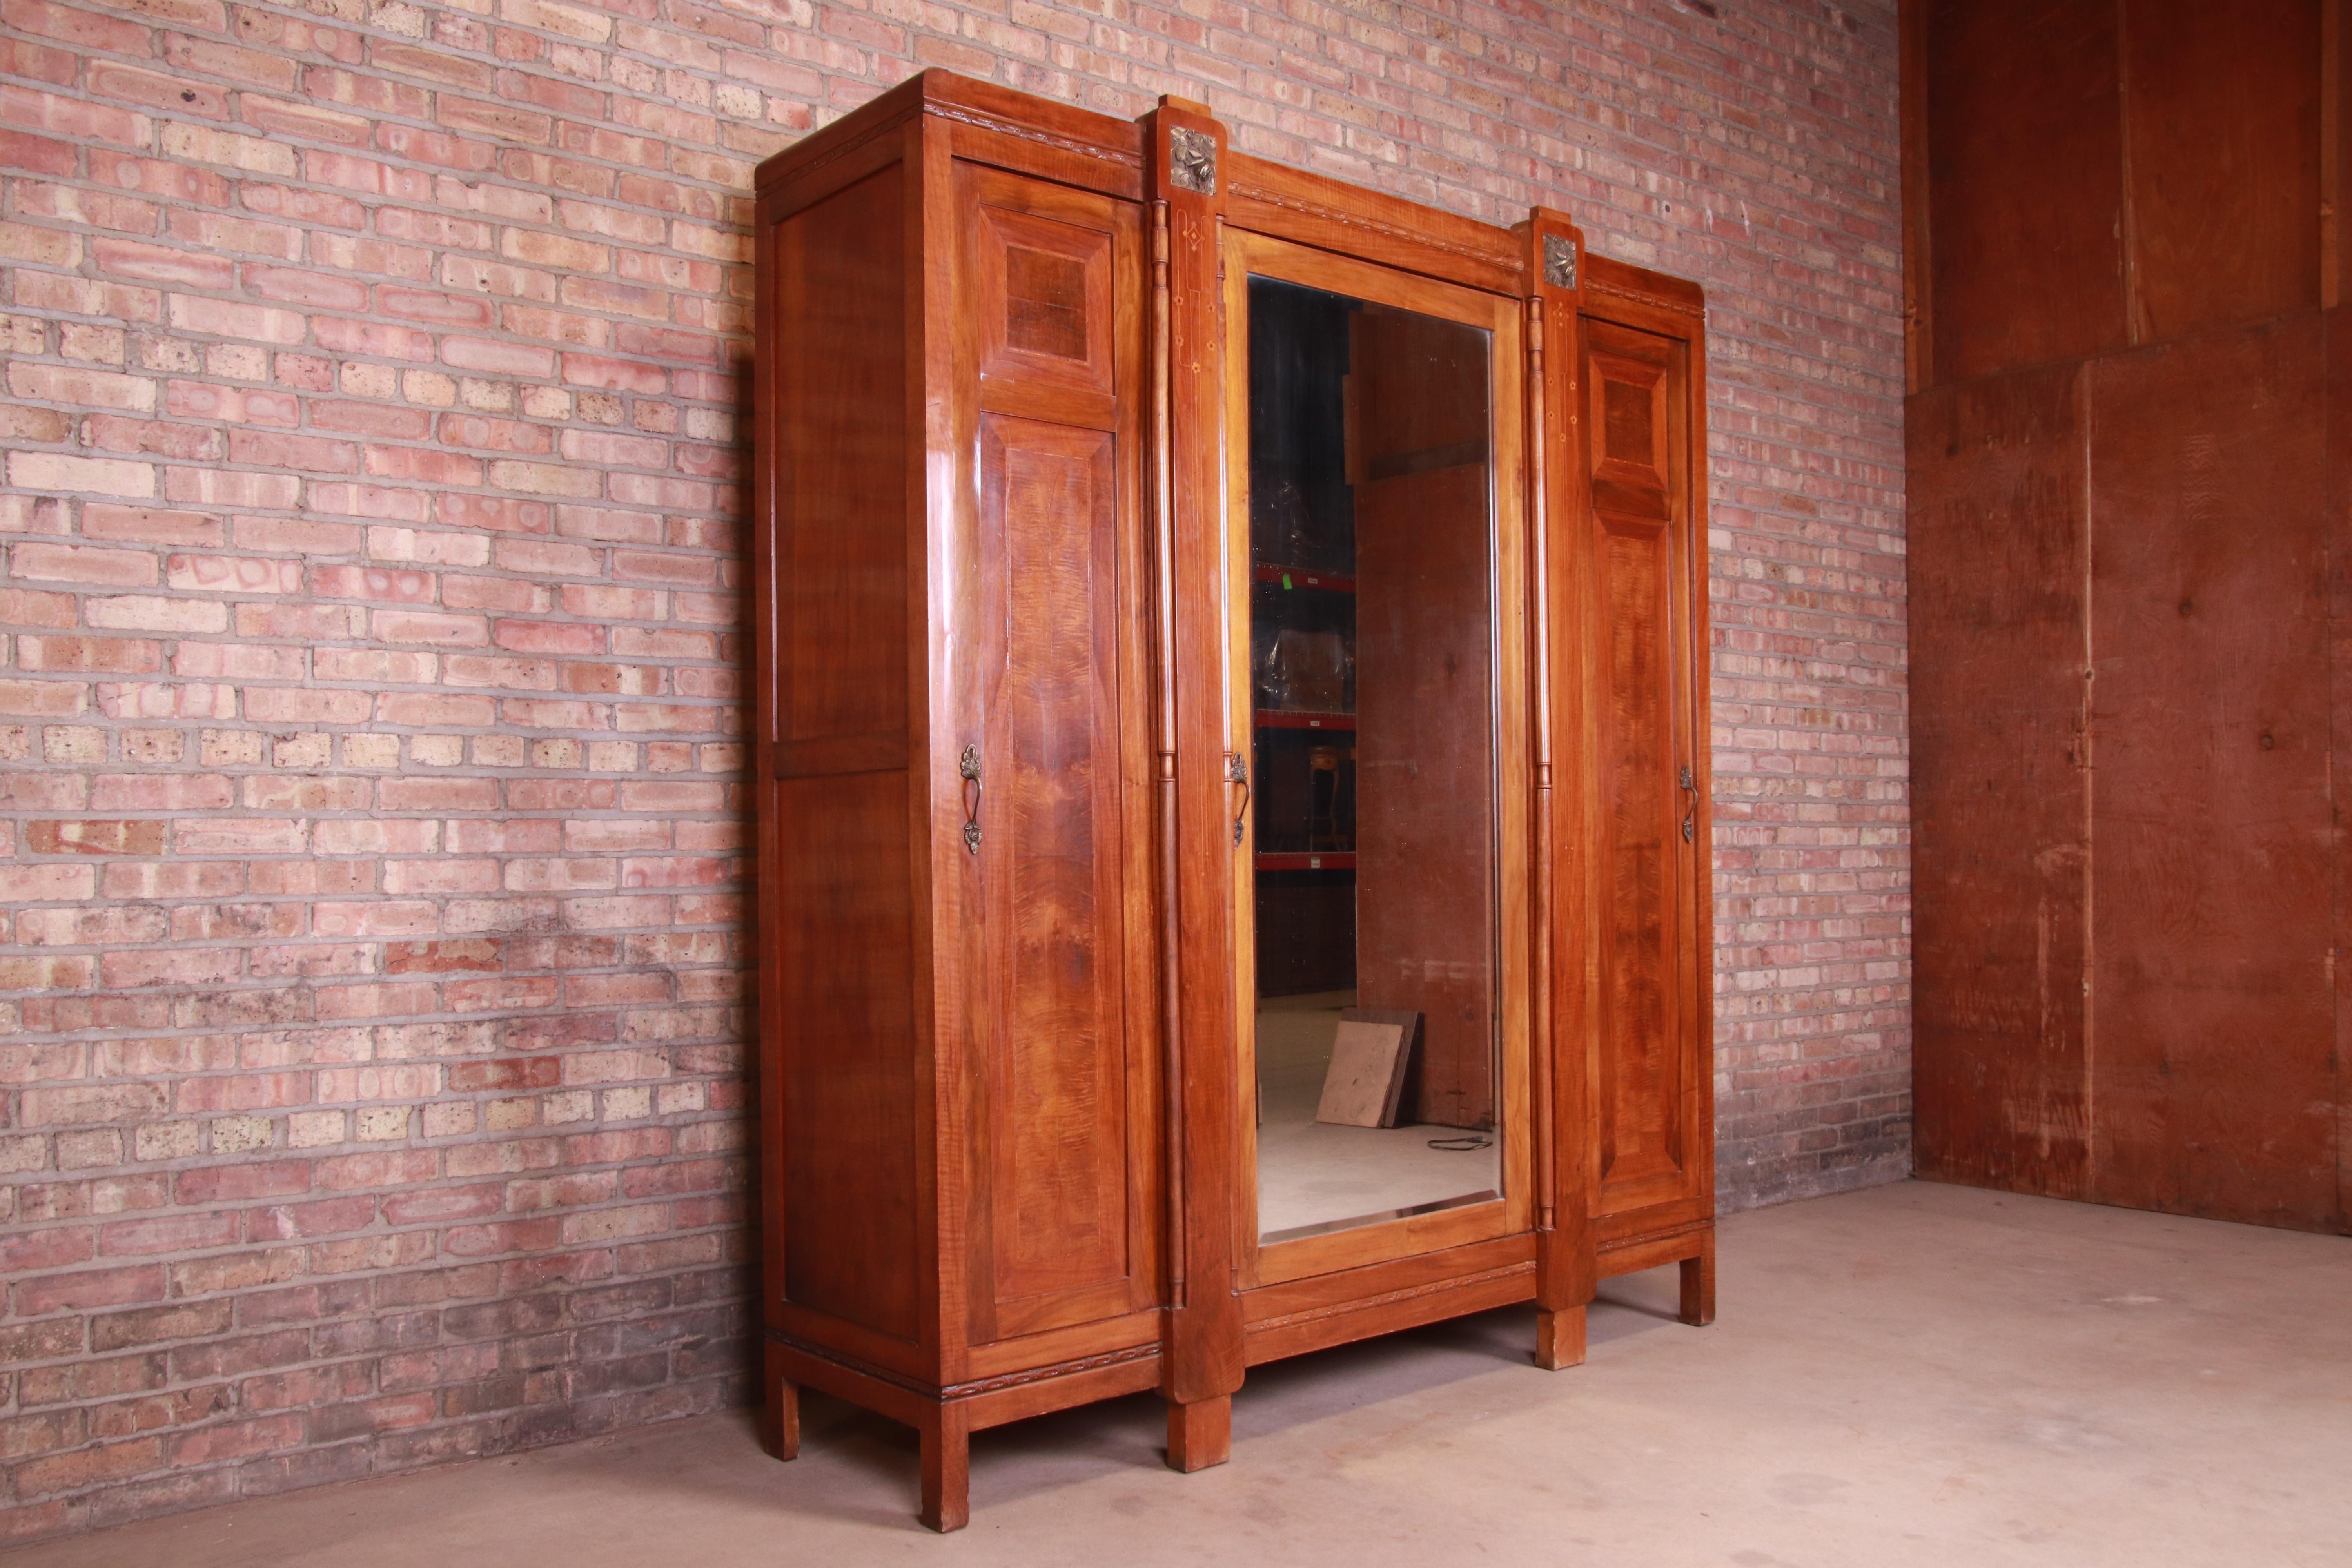 A stunning French Art Deco knockdown armoire dresser or wardrobe

France, circa 1920s

Carved mahogany, with inlaid parquetry and mounted brass. Beveled mirror on center door. Interior shelving adjustable and removable.

Measures: 79